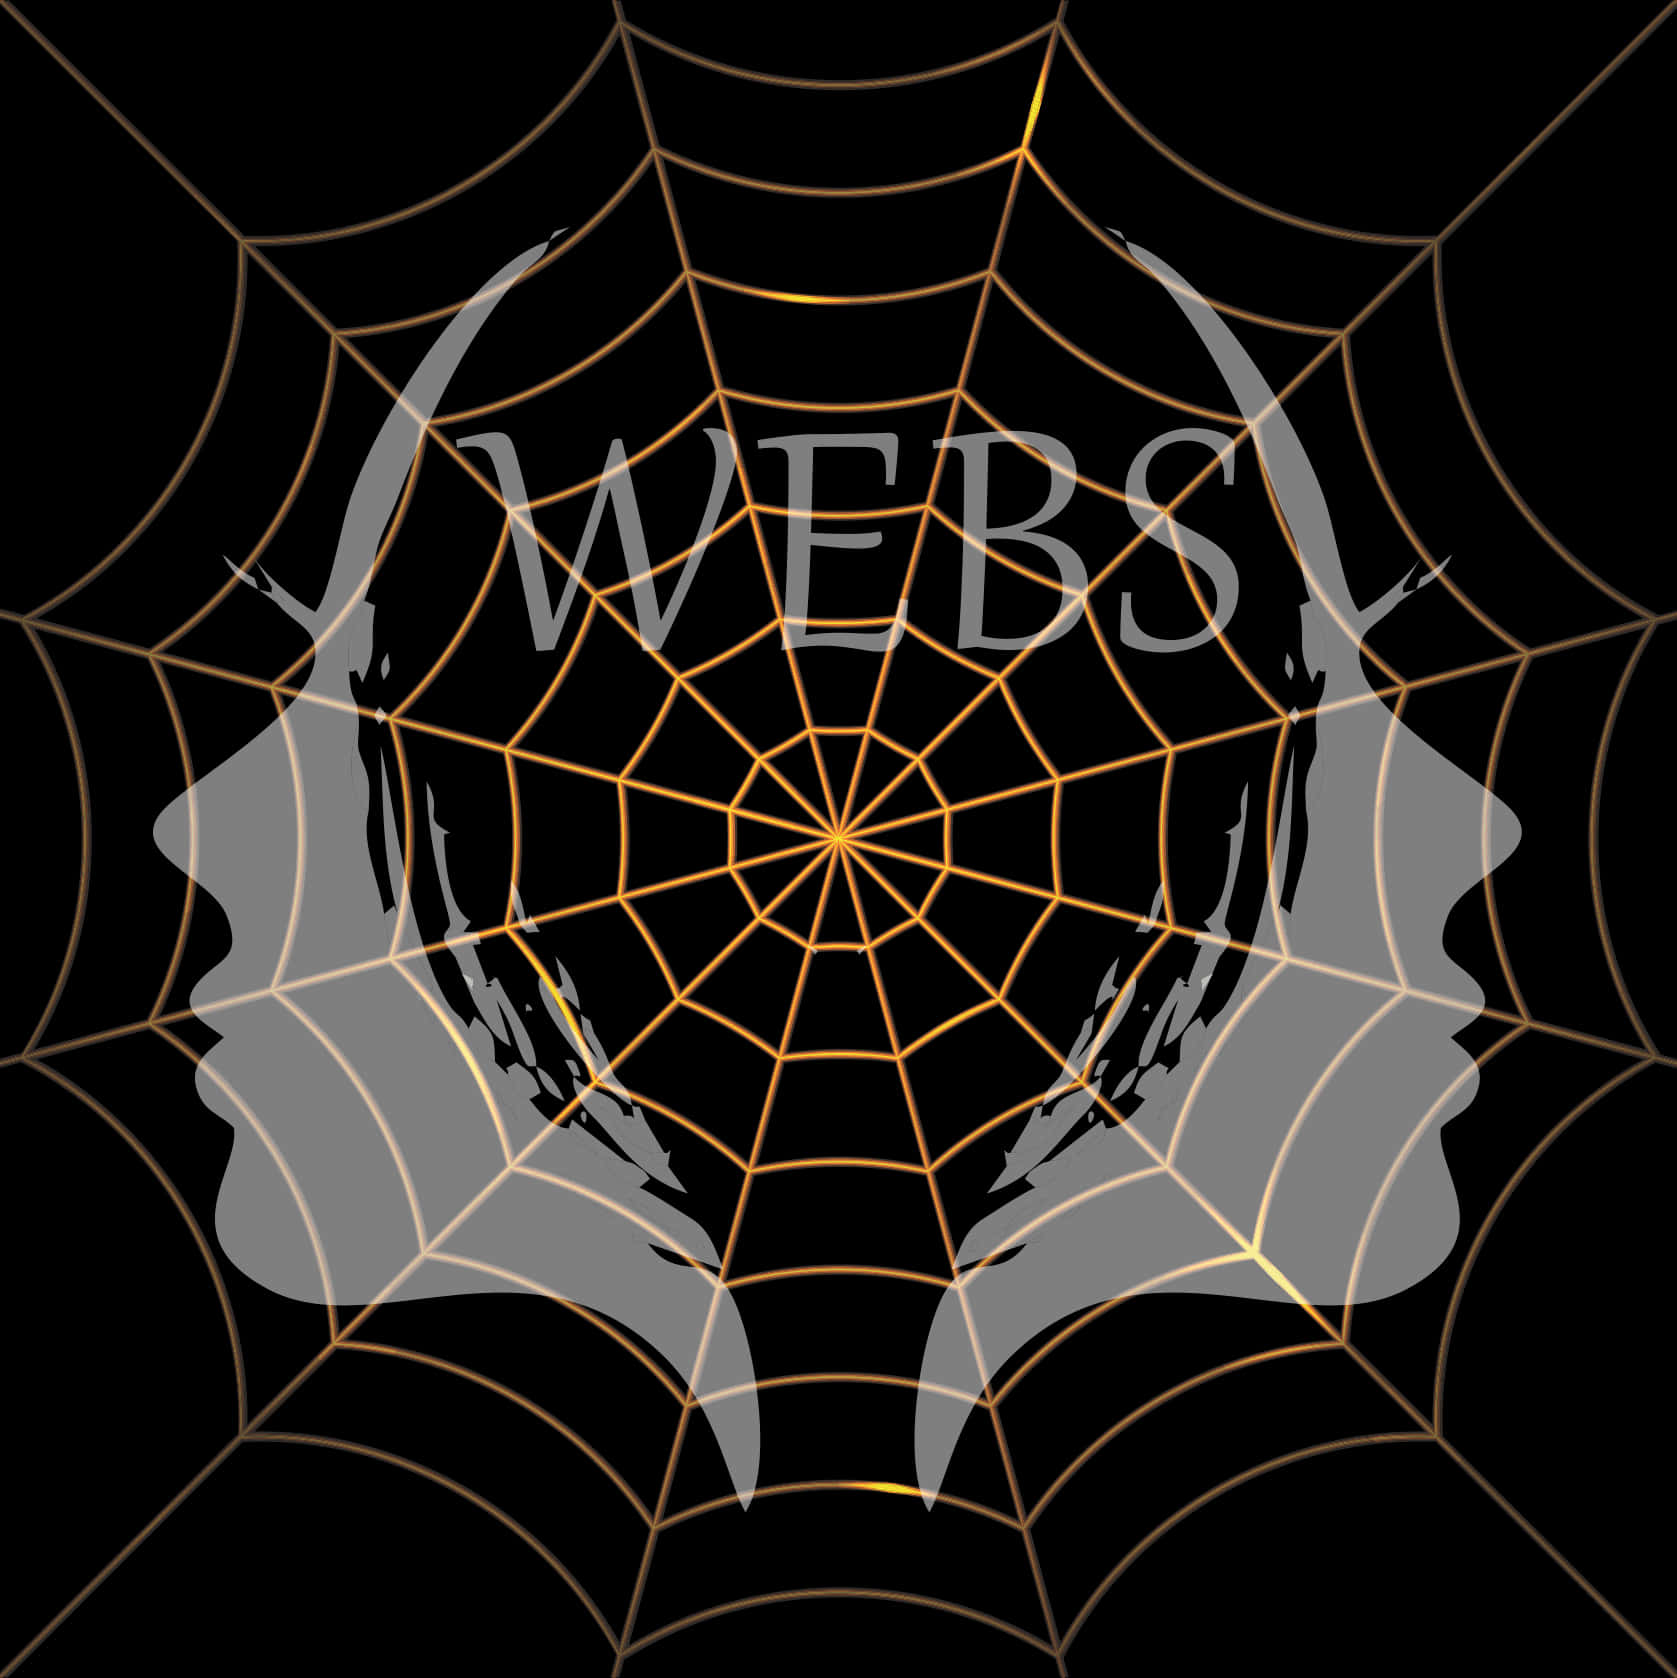 A Web With Two Faces And Text